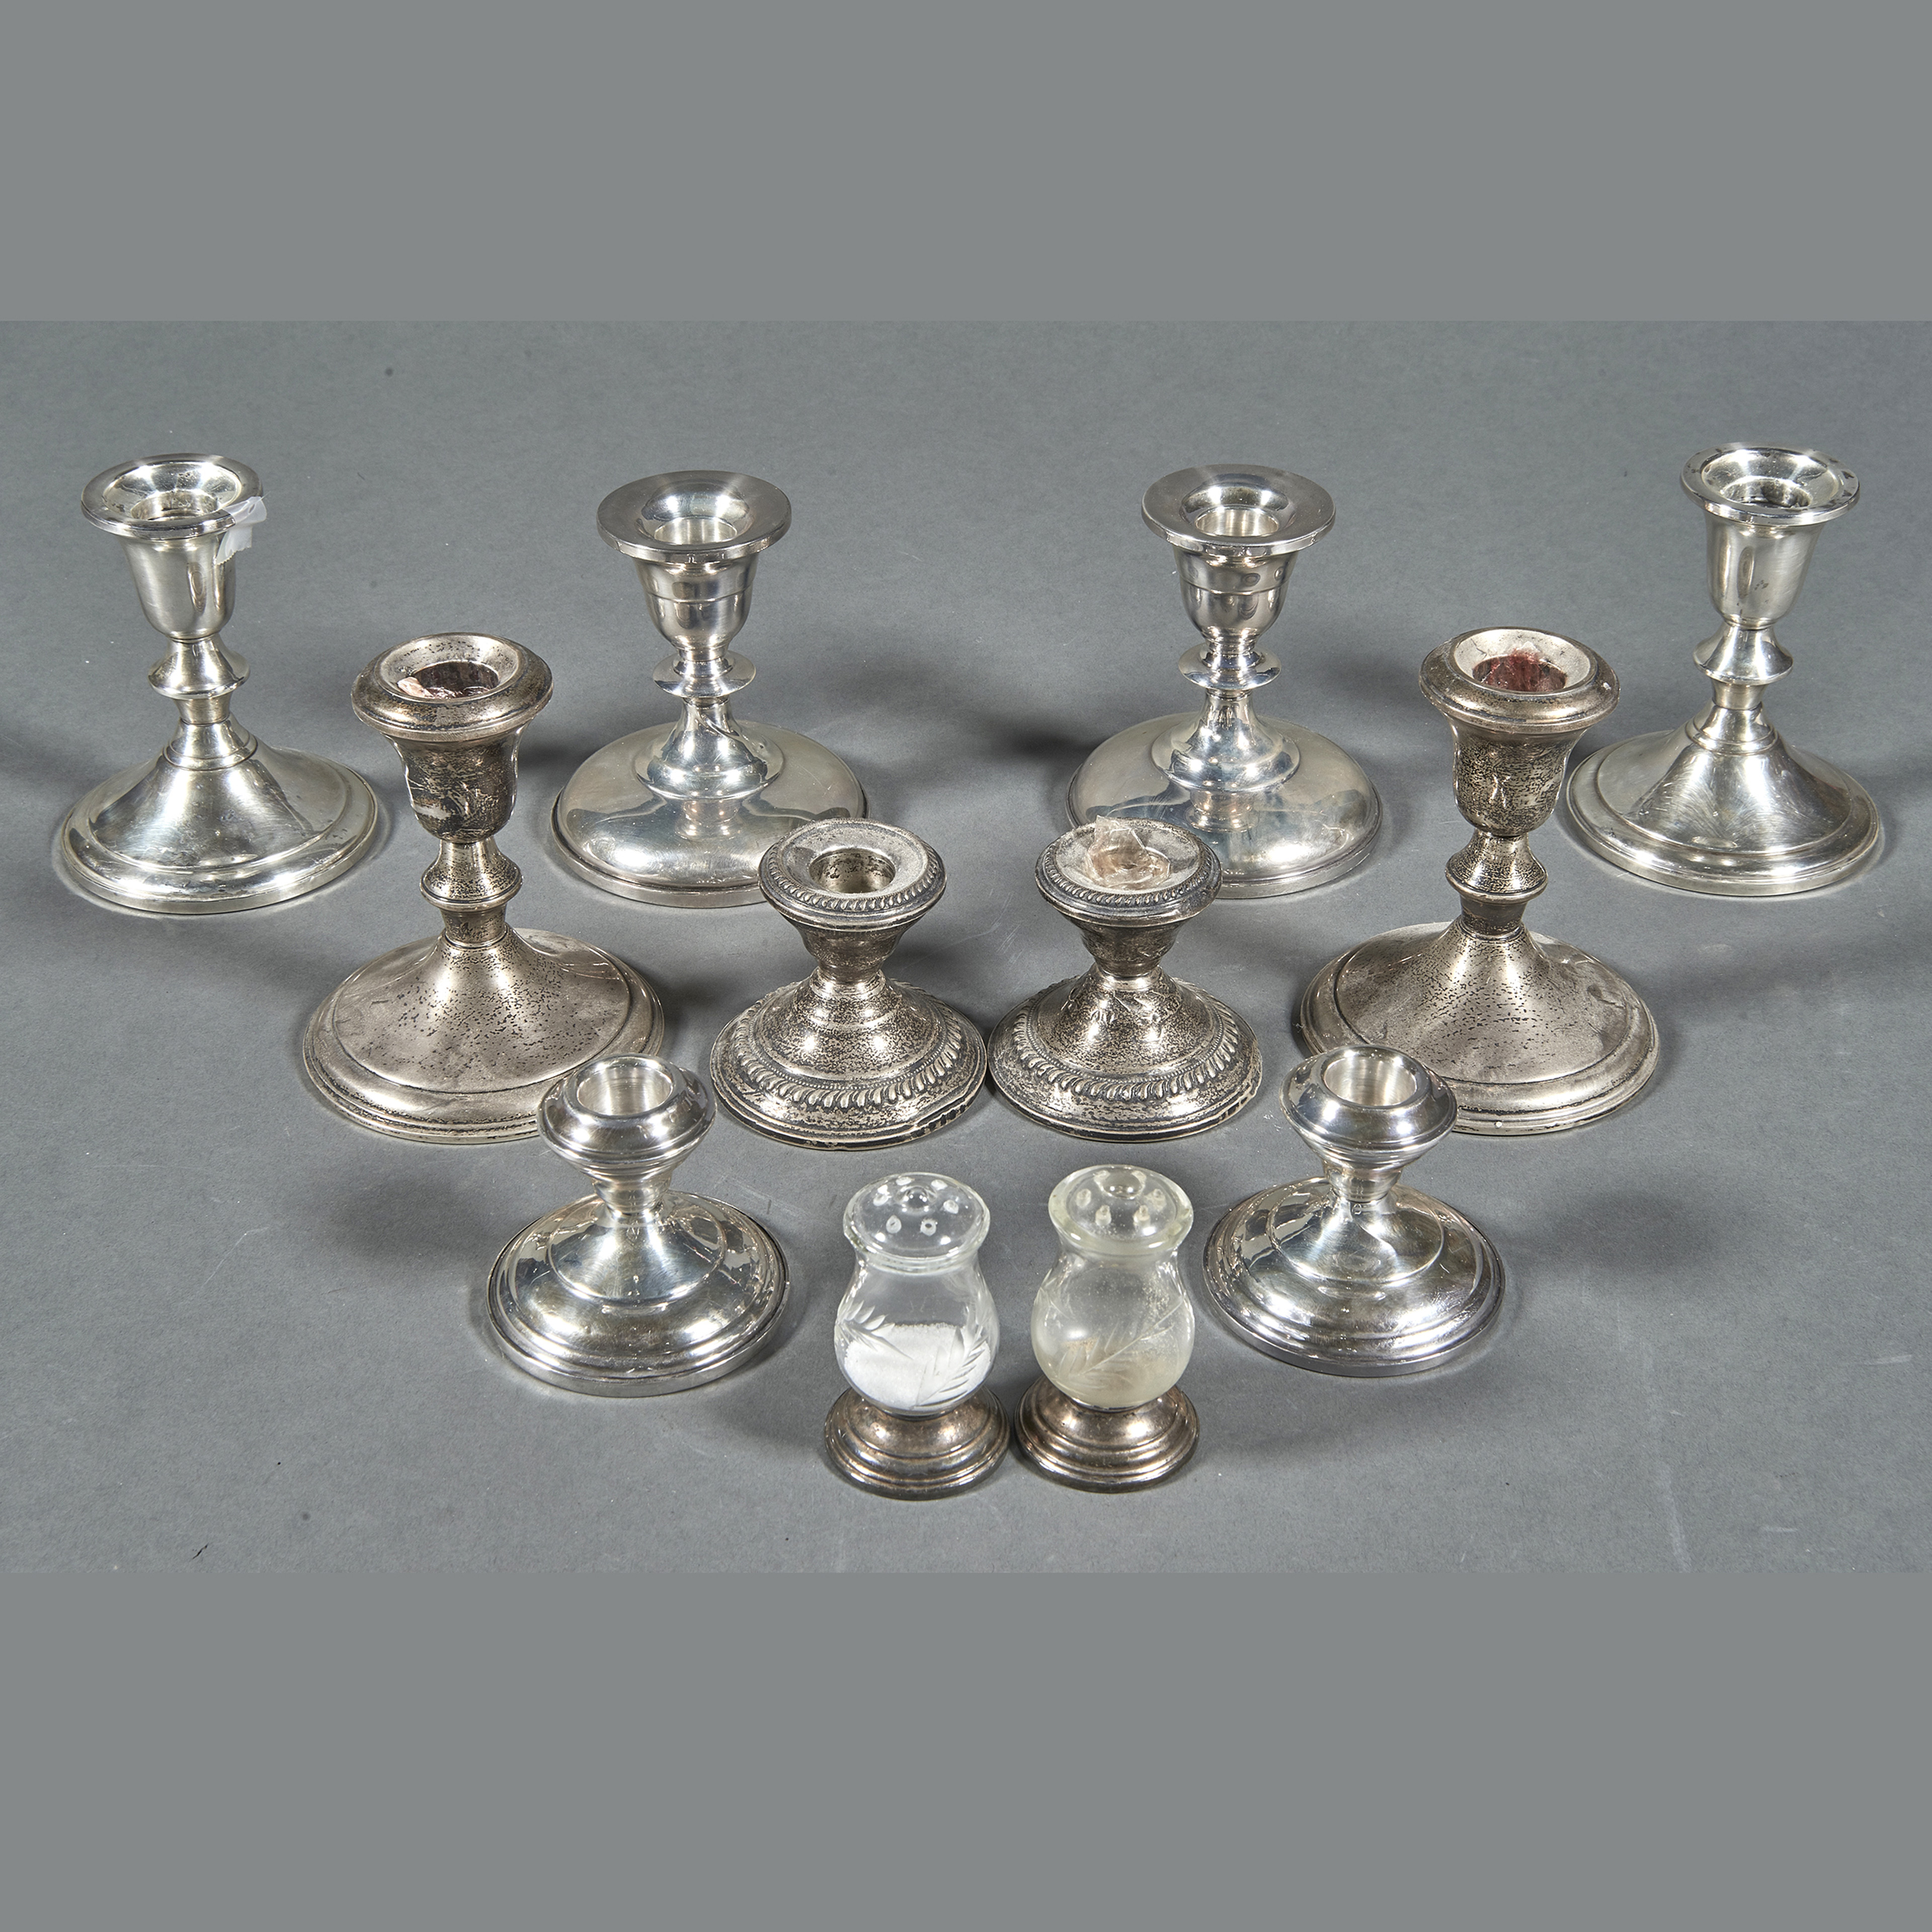  10 STERLING WEIGHTED CANDLESTANDS  3a61e9